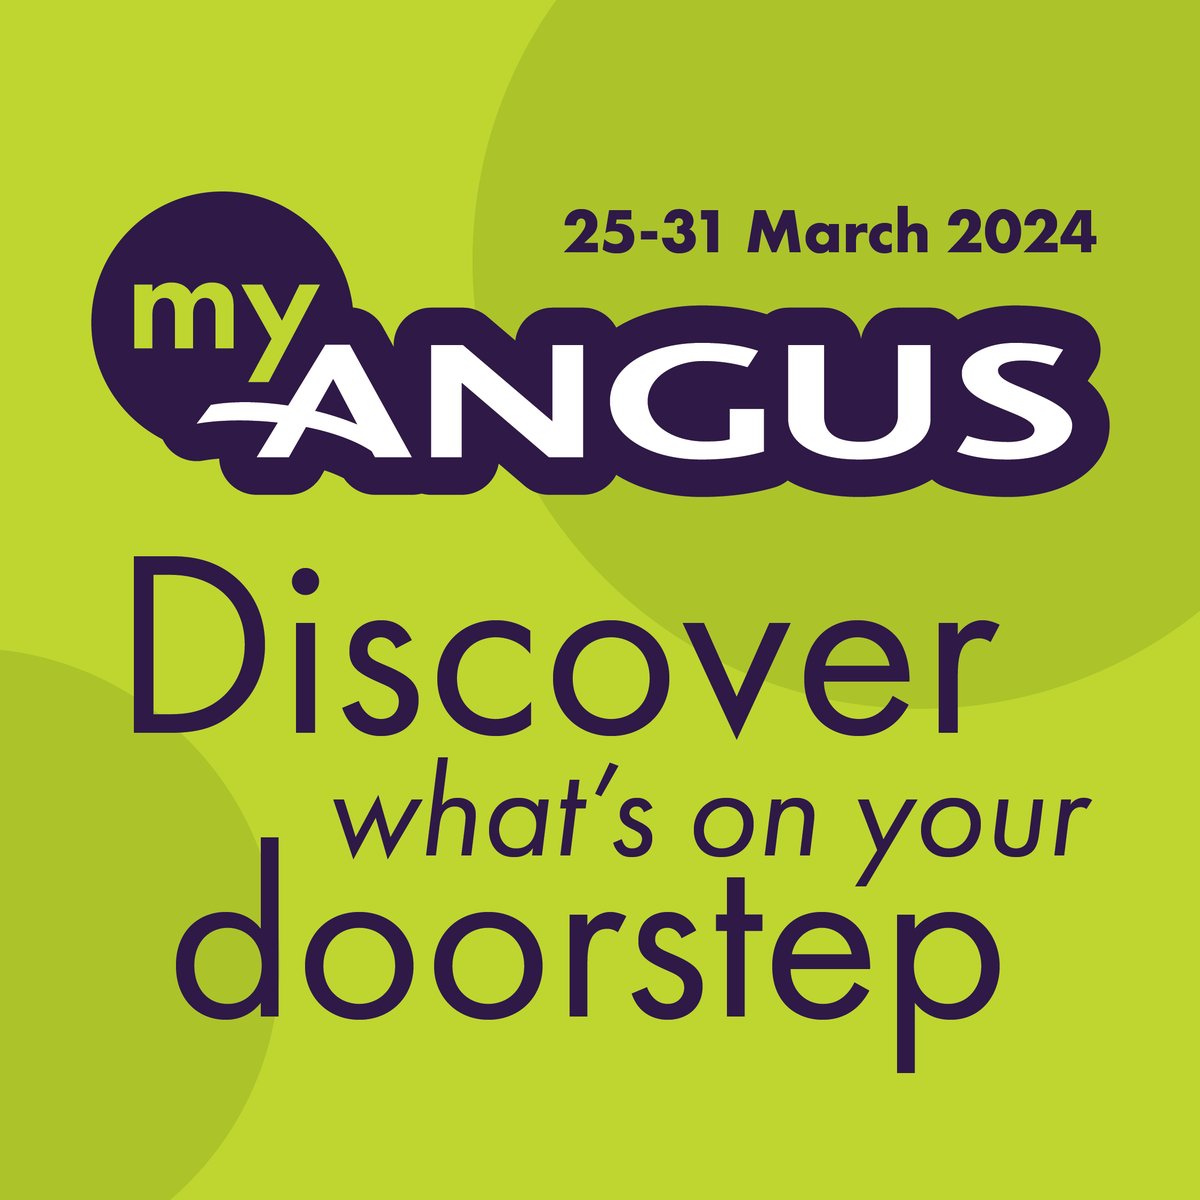 My Angus starts today and is a fantastic opportunity for Angus residents to take advantage of special offers to discover what is on their doorstep. Here at Glamia Castle discounted Castle tours are available this week. visitangus.com/myangus. #MyAngus